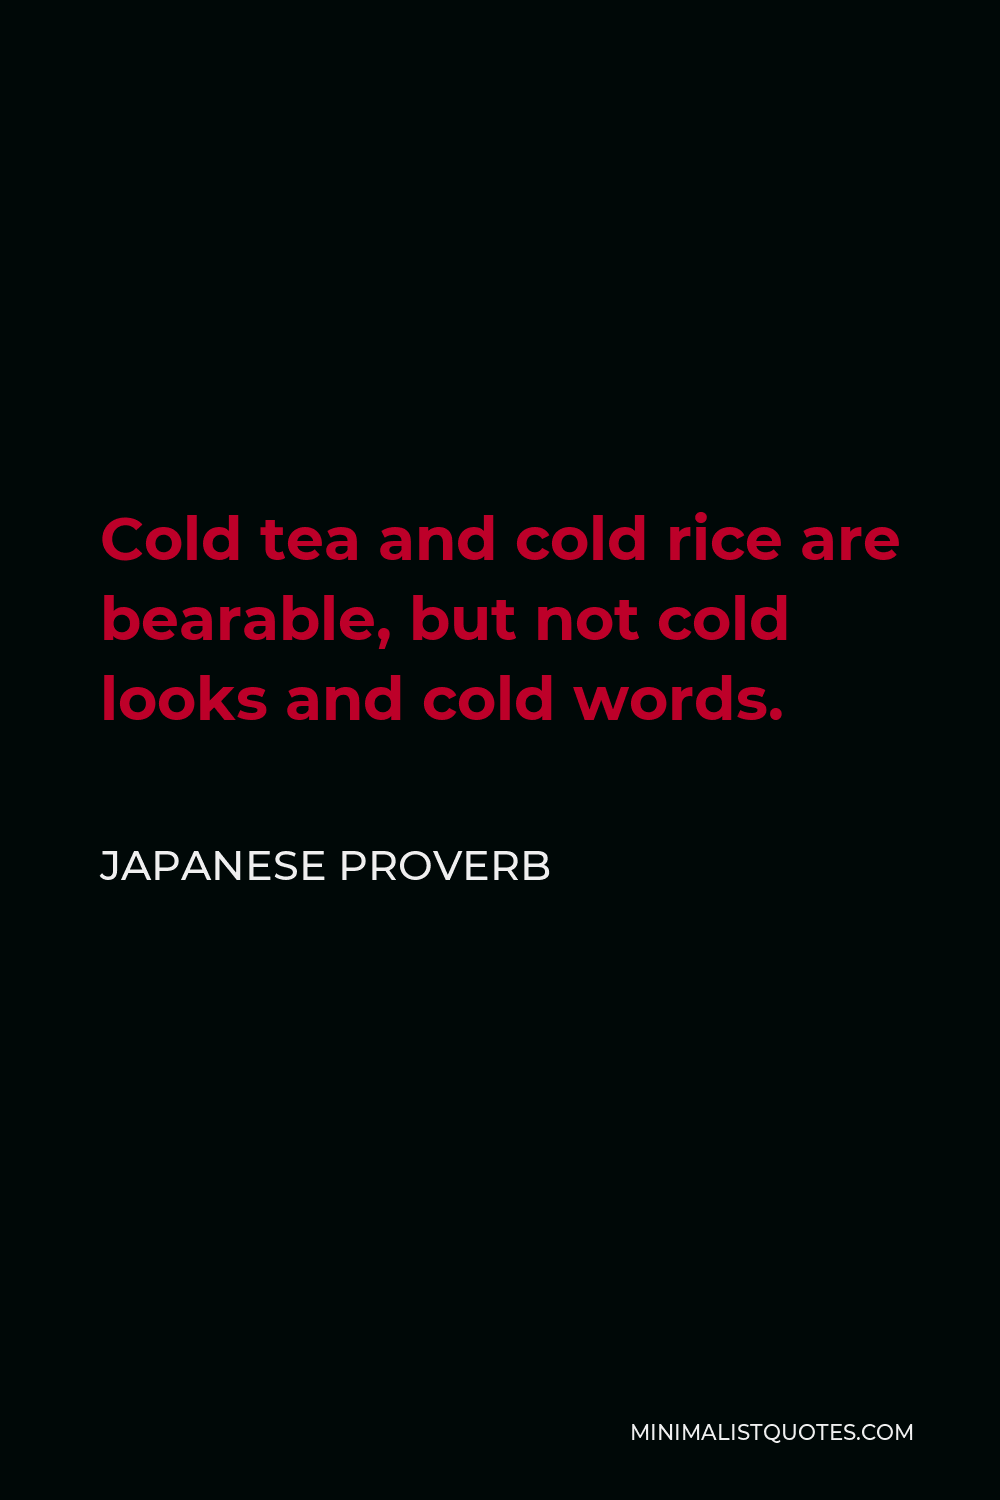 Japanese Proverb Quote - Cold tea and cold rice are bearable, but not cold looks and cold words.